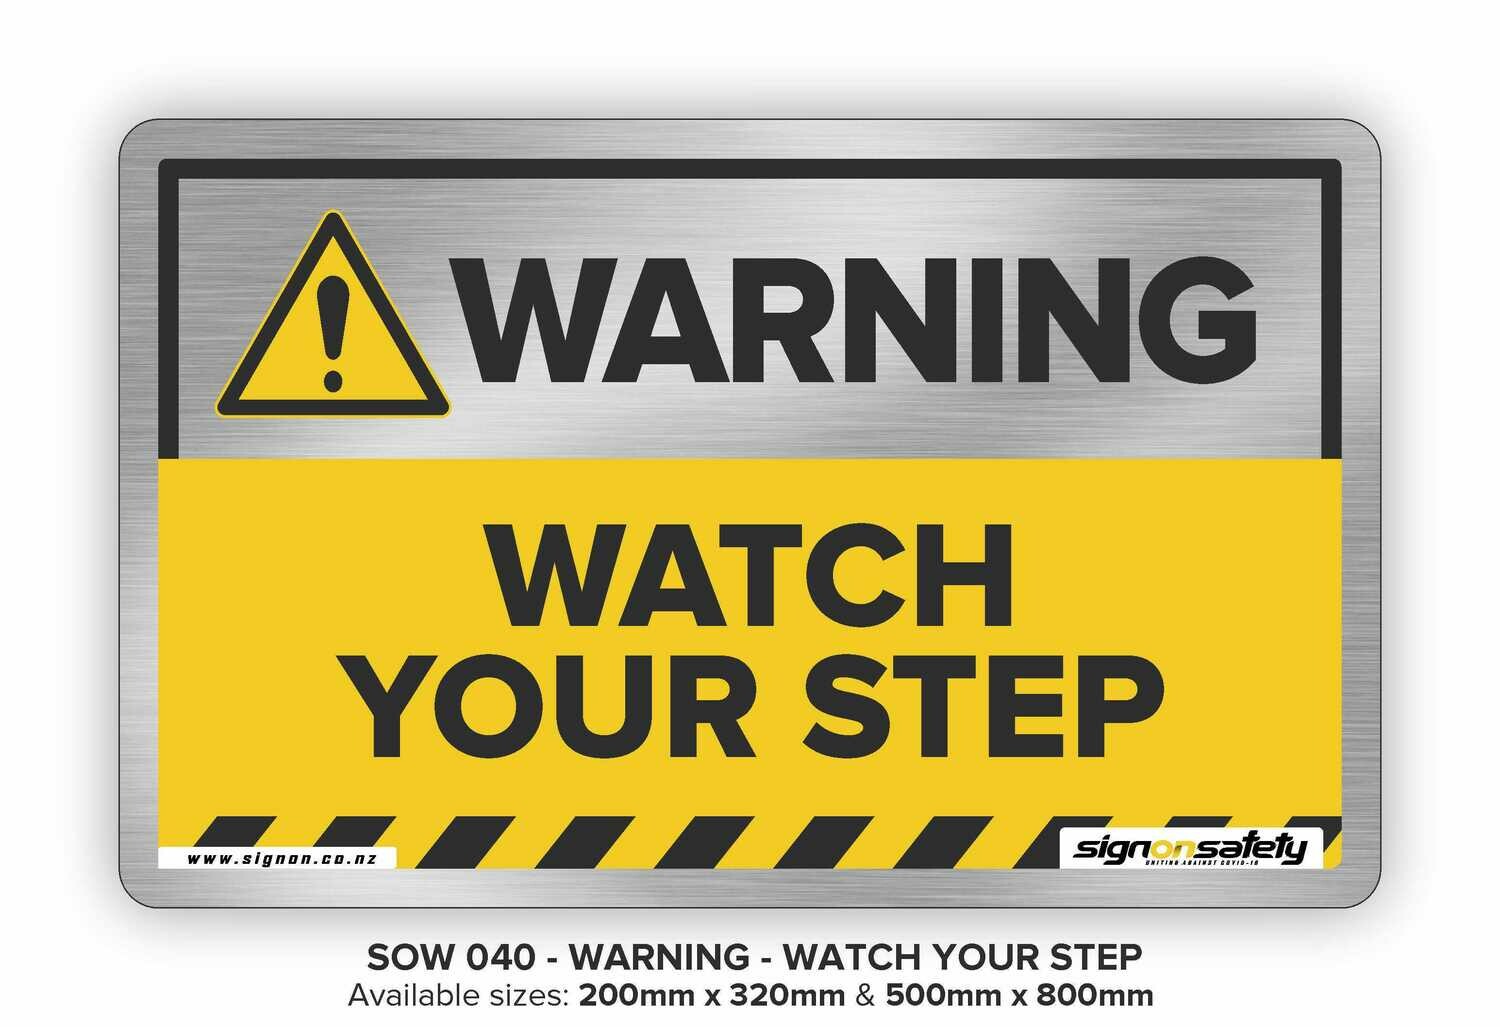 Warning - Watch Your Step